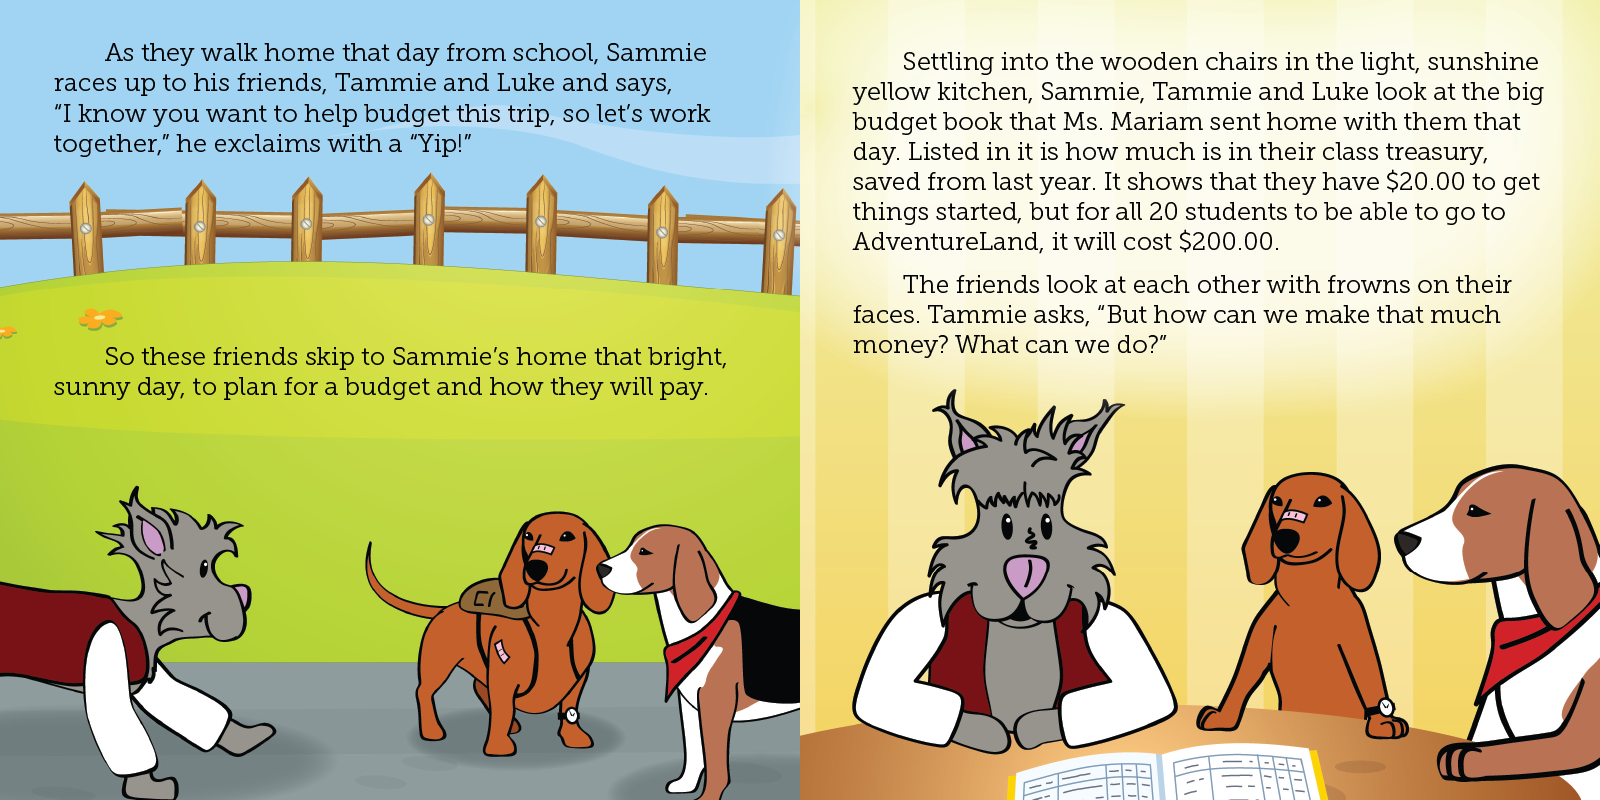 Slide 7 of the Sammie and the Pumpkin Patch E-book